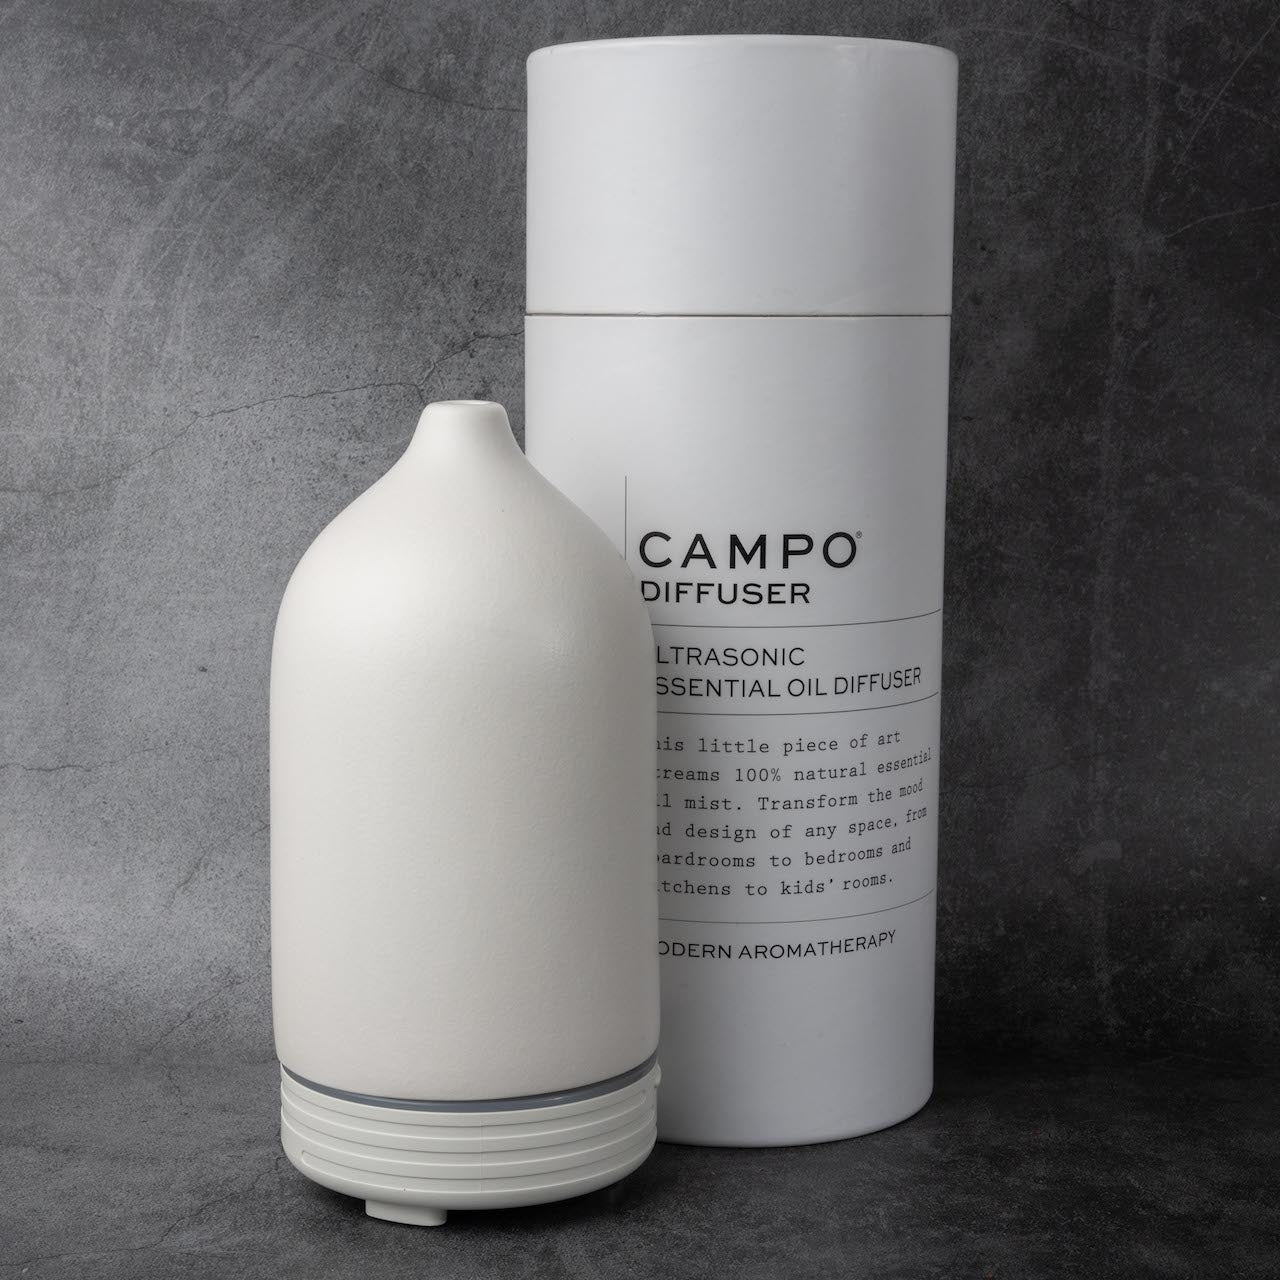 A white, cone shaped oil diffuser and a larger cylinder-shaped package reading "CAMPO Diffuser, Ultrasonic Essential Oil Diffuser" against a gray stone background.